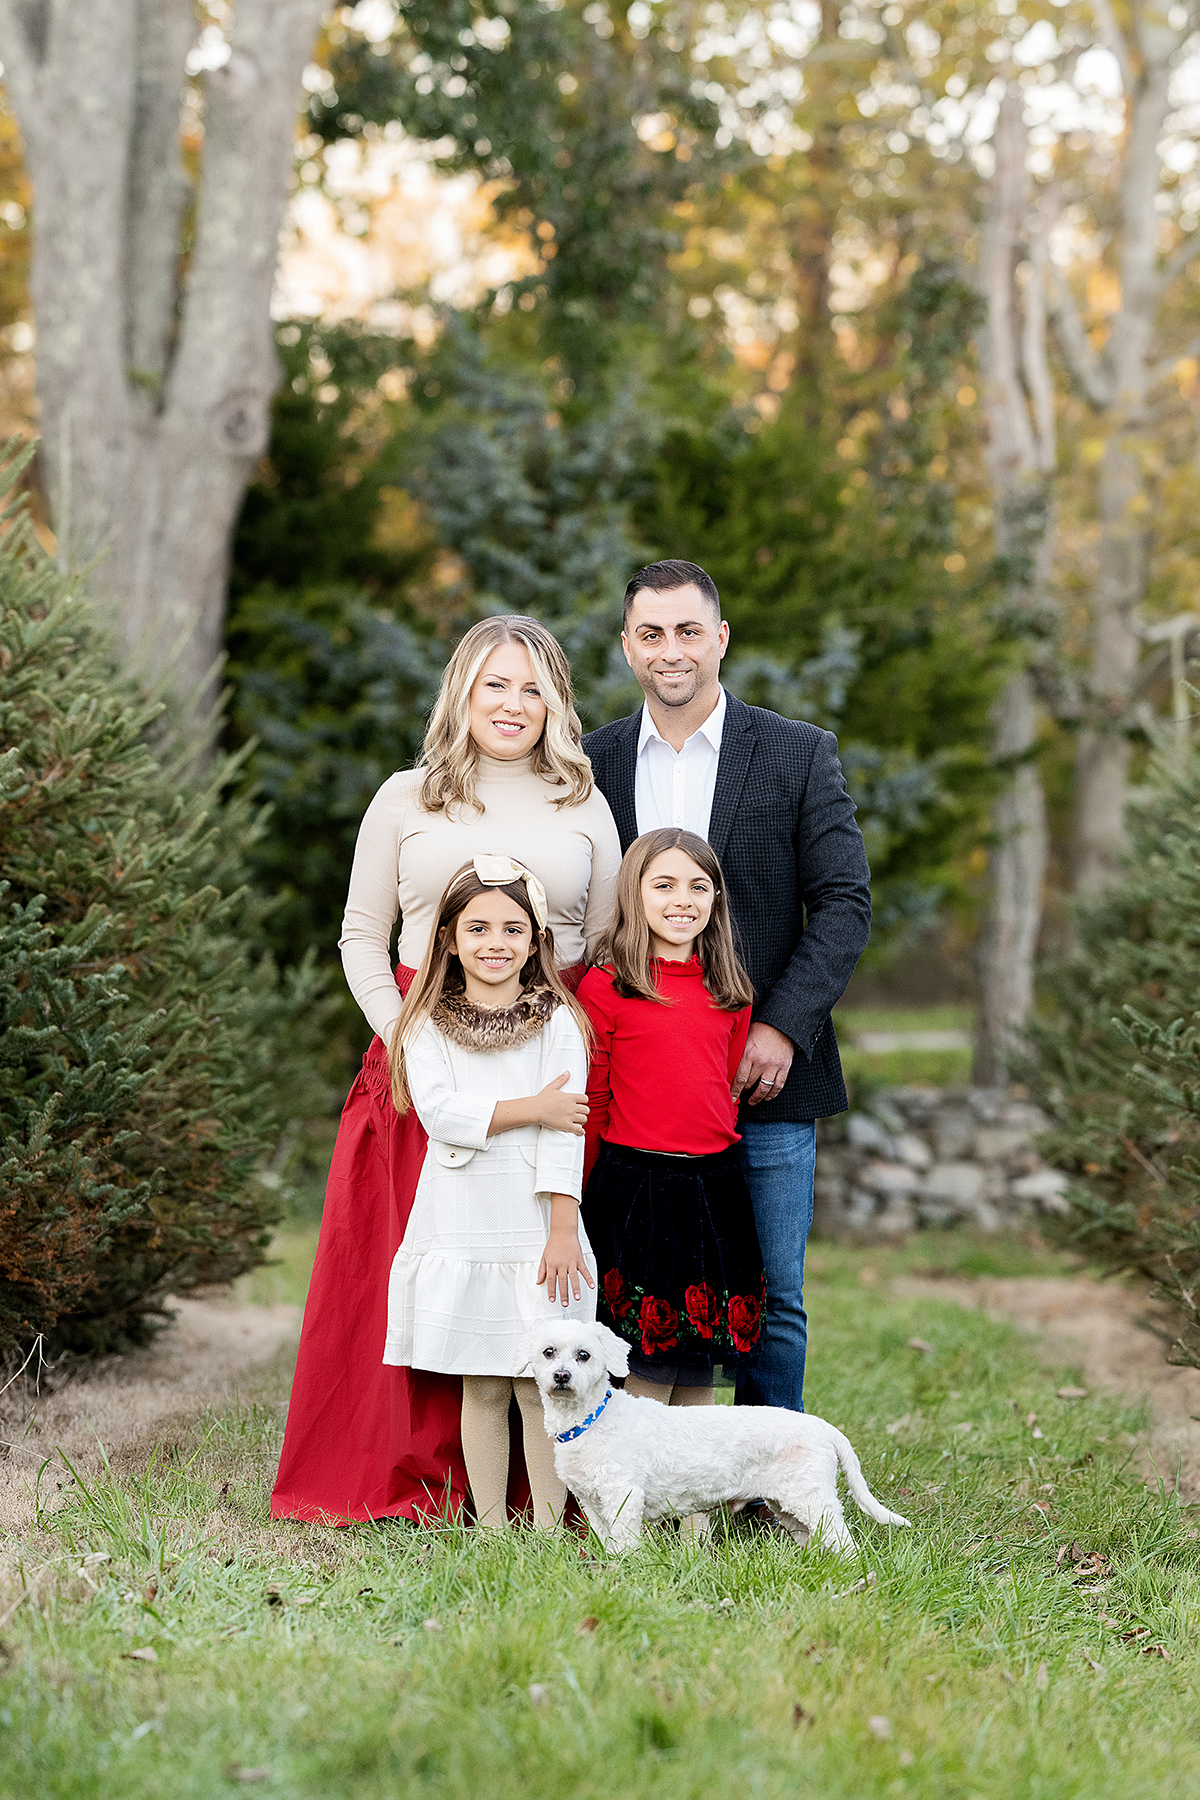 Family Photography and Photo mini Sessions at The Farmer's Daughter Tree Farm in South Kingstown, RI - family with dog